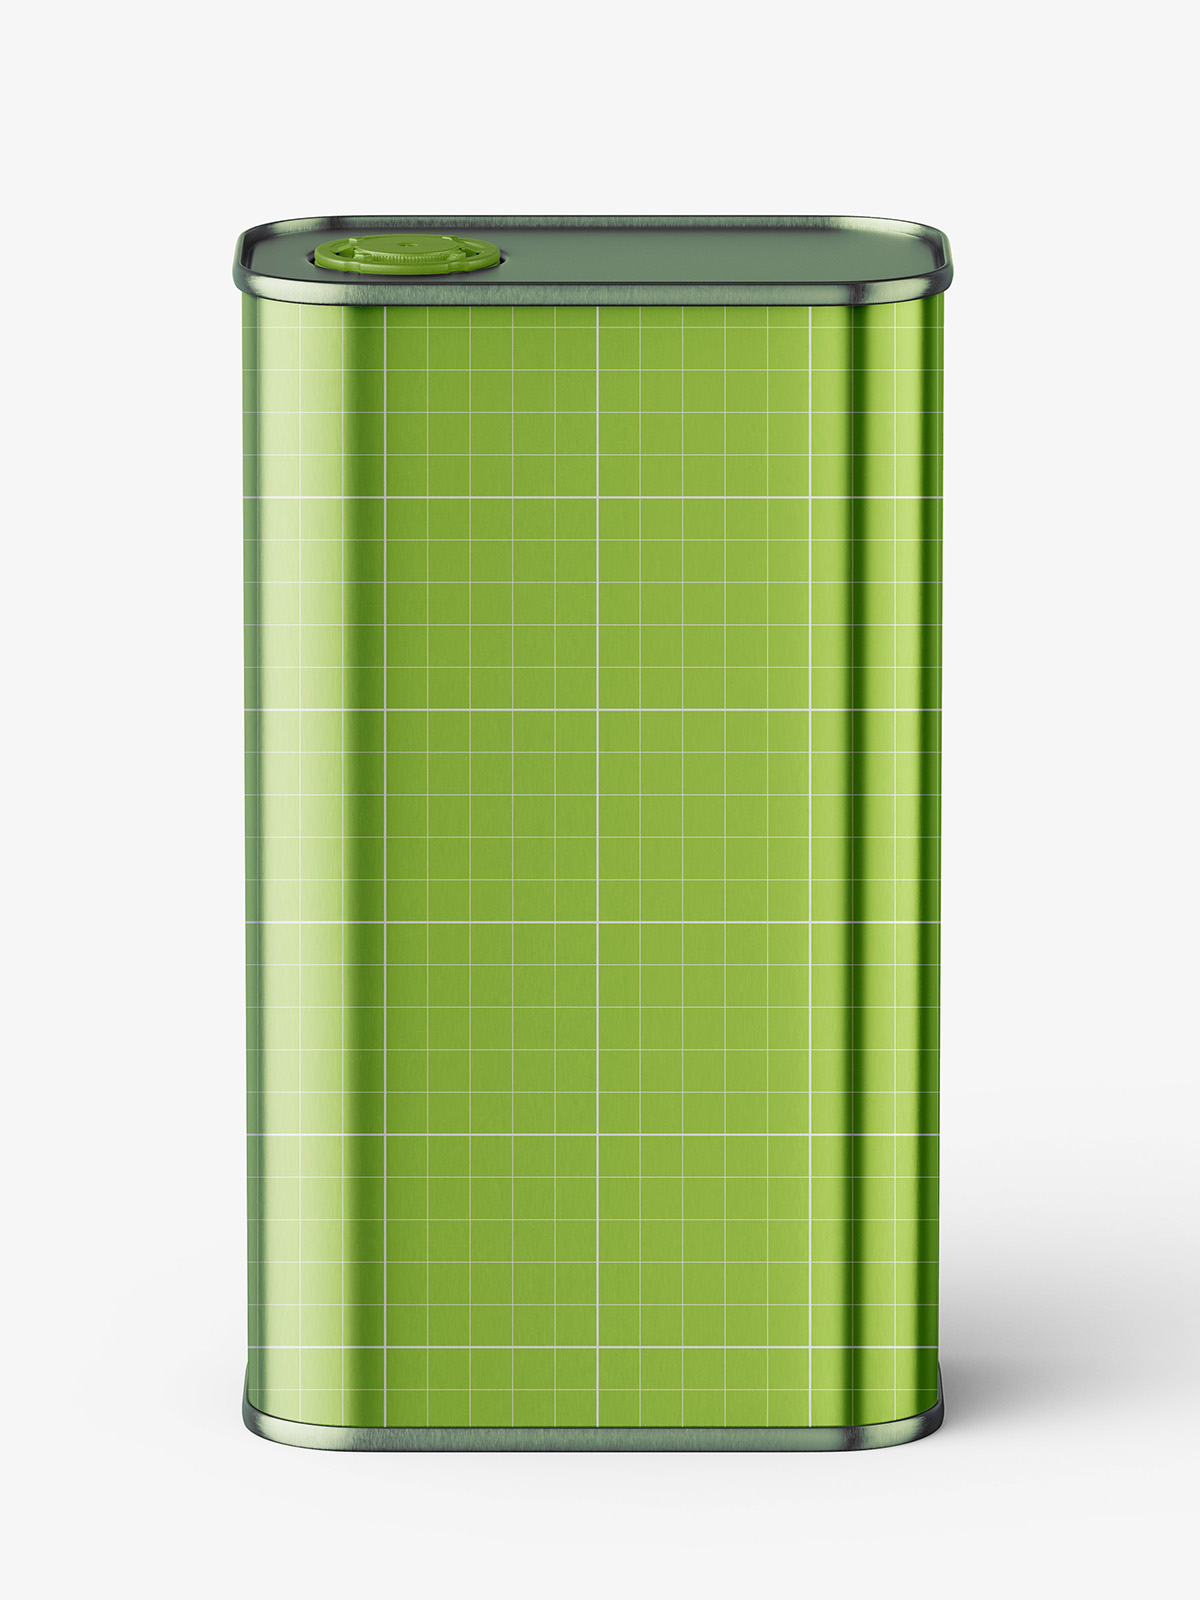 Download Oil tin can mockup - Smarty Mockups